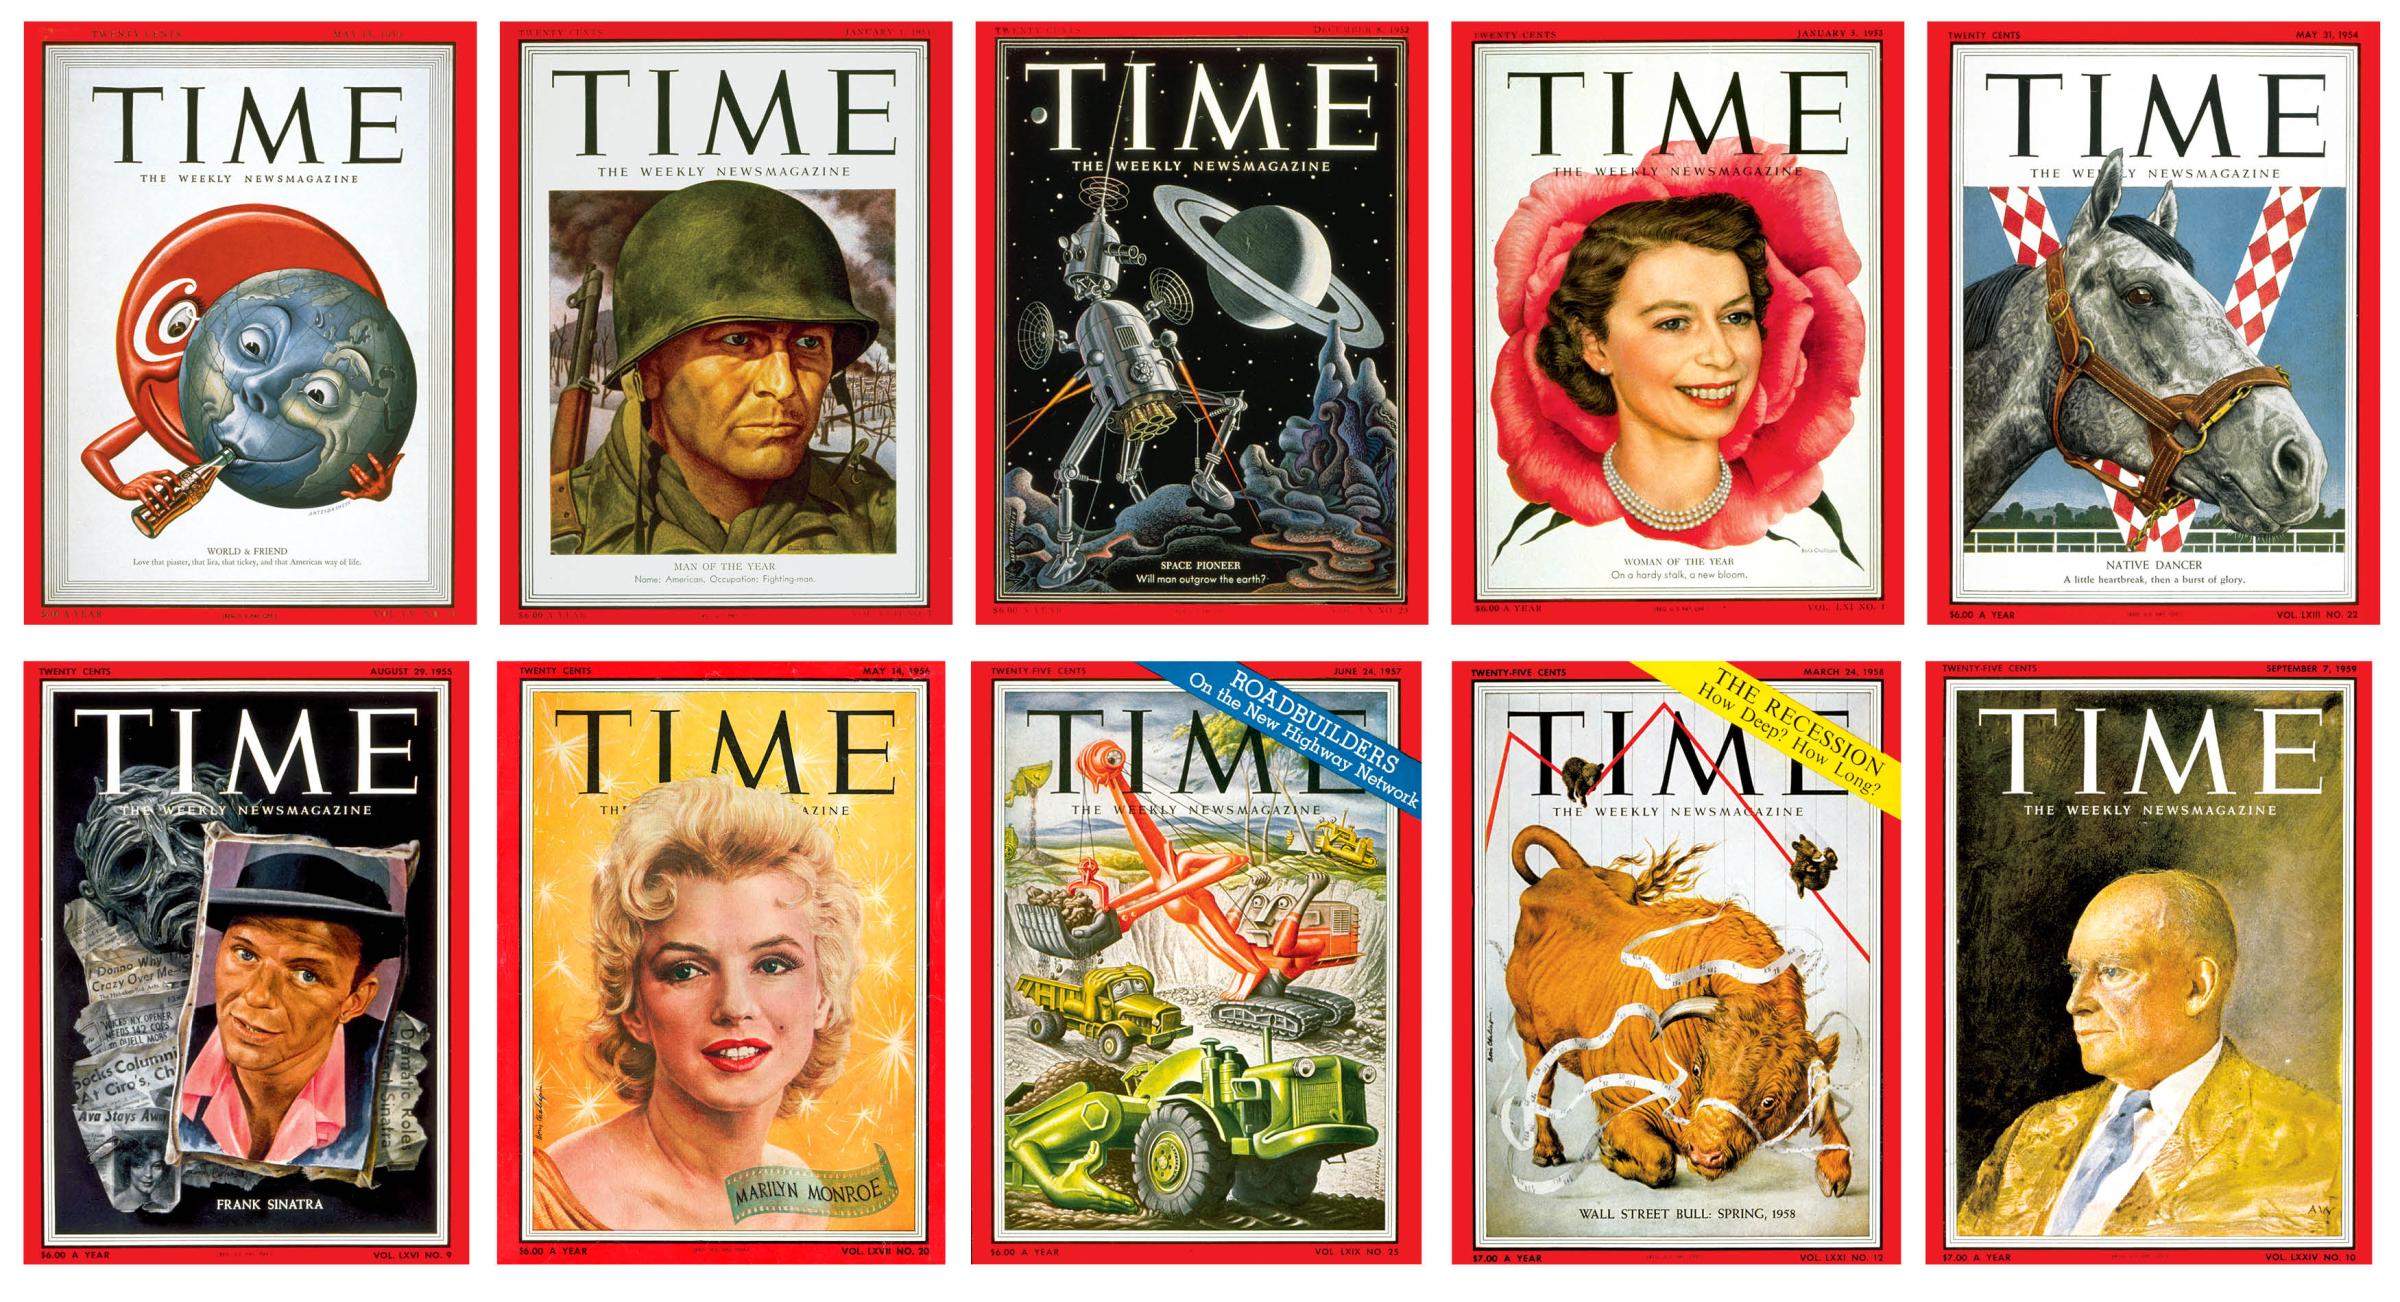 TIME cover decades 1950s